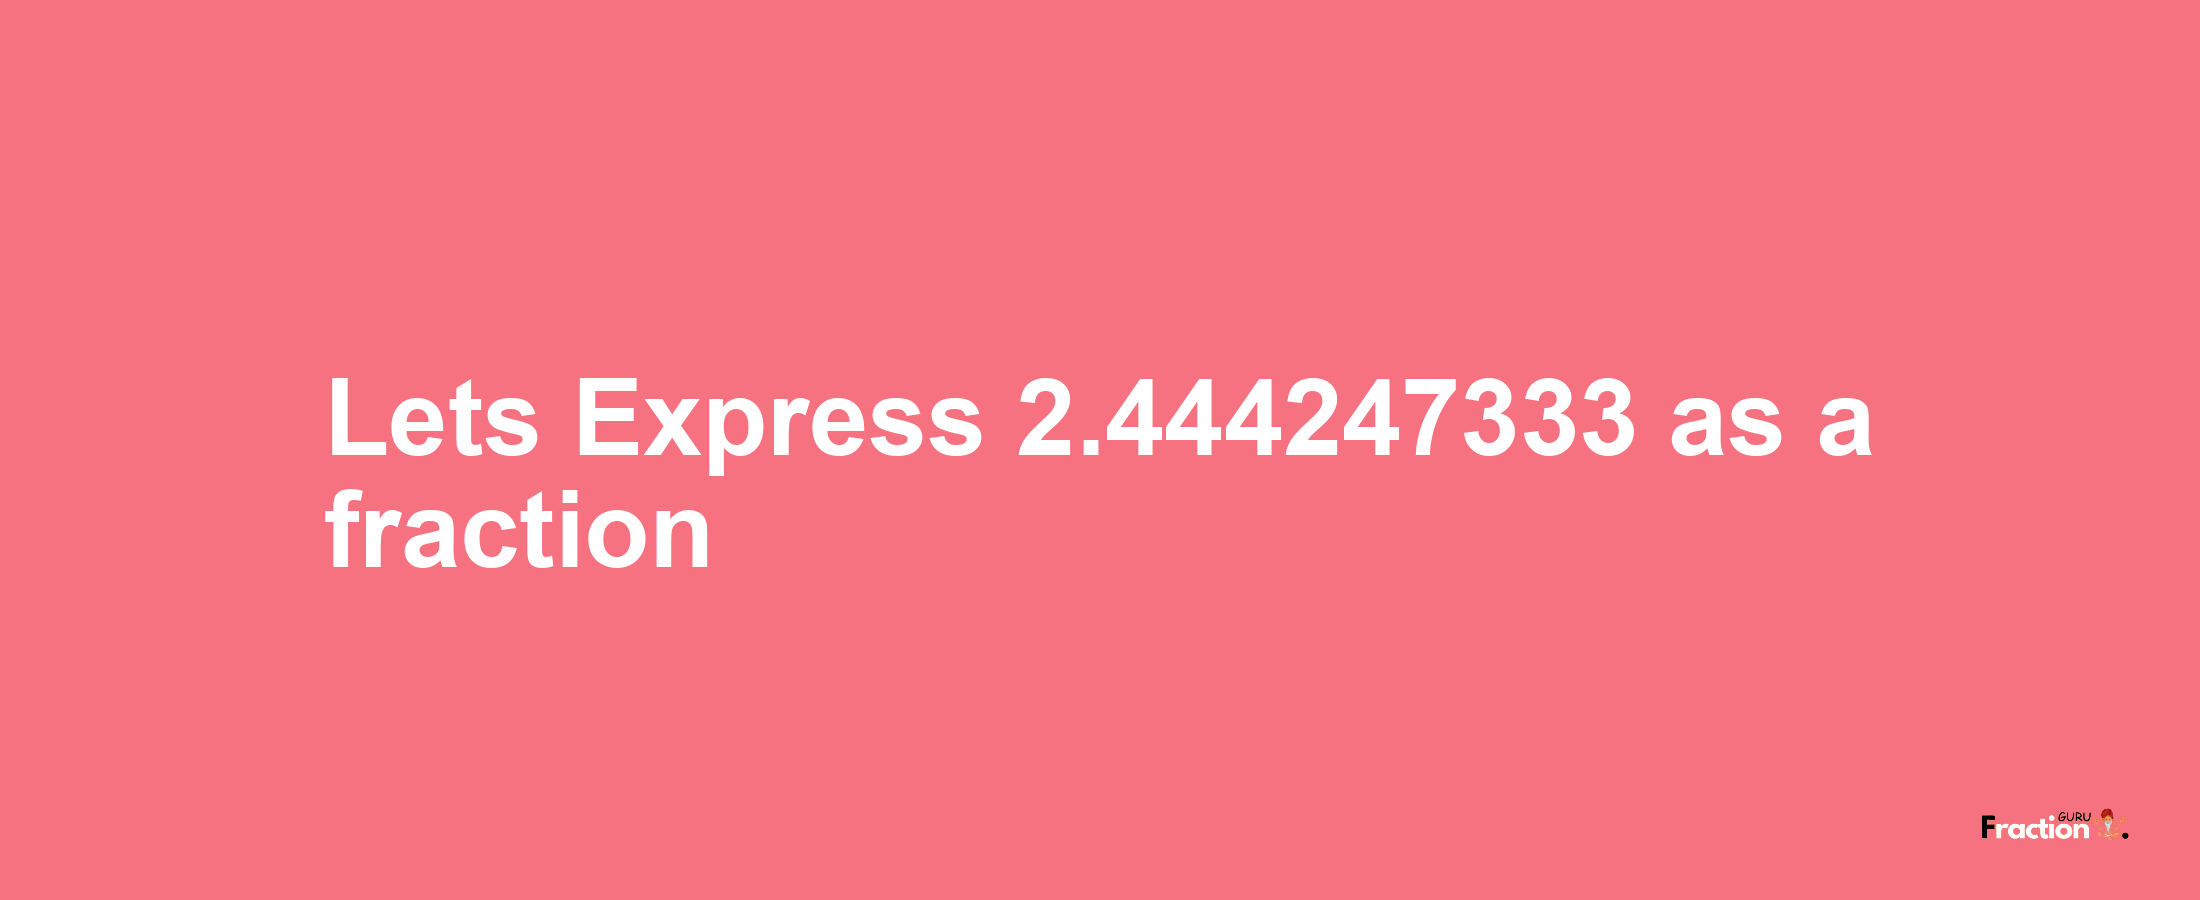 Lets Express 2.444247333 as afraction